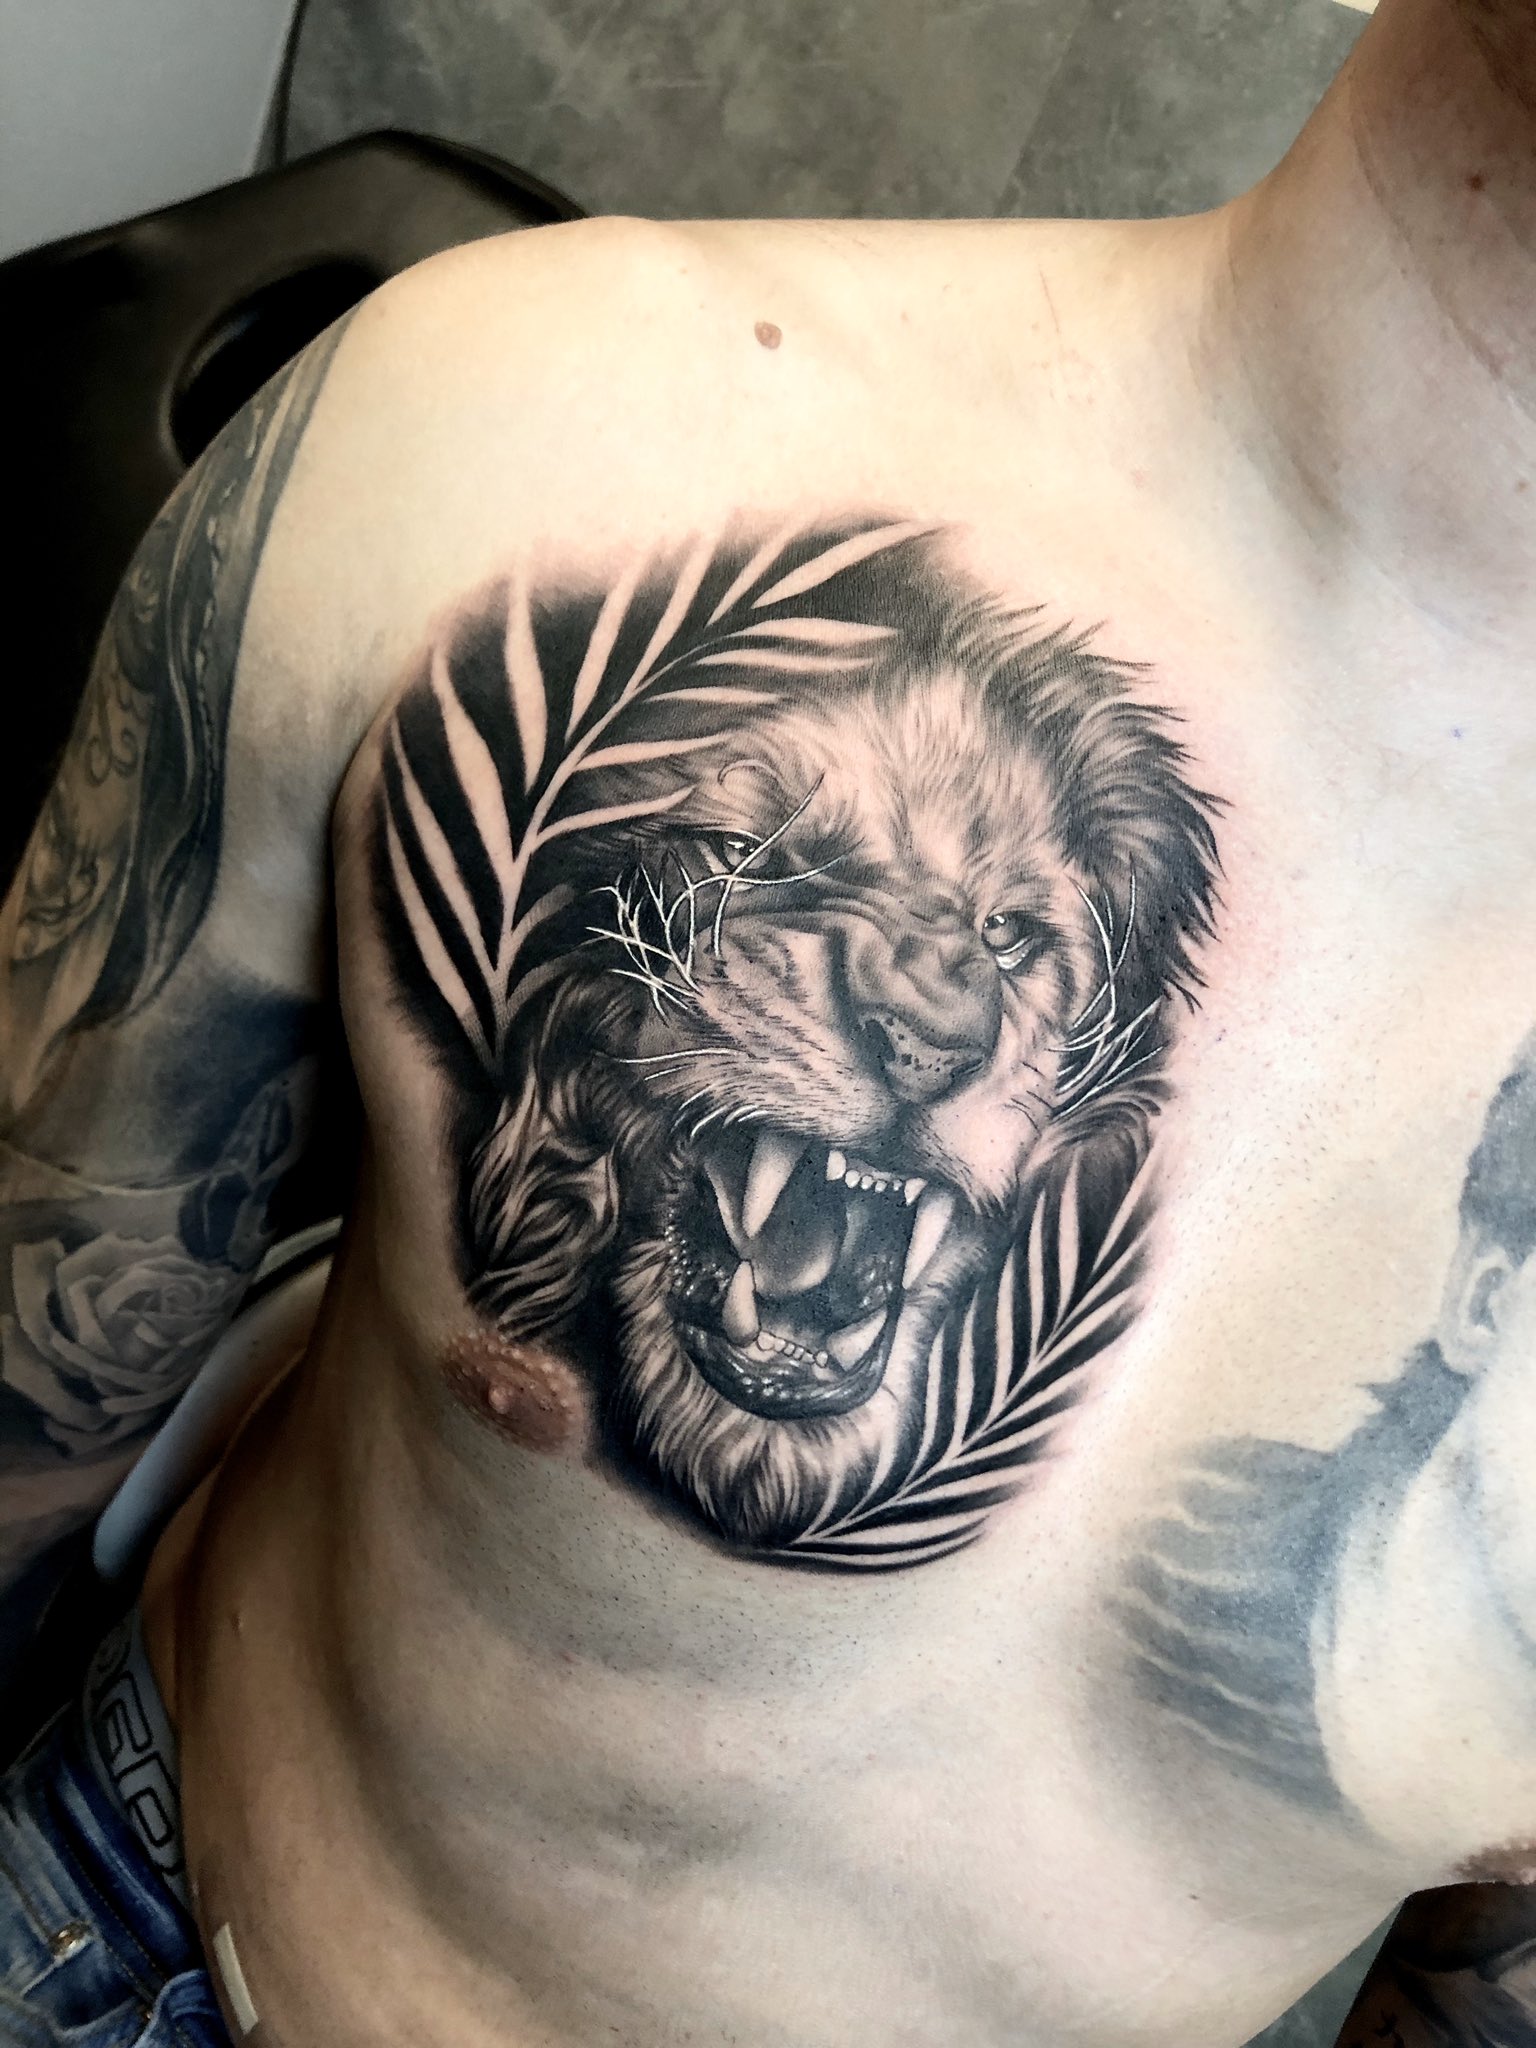 Man gets huge lion tattoo that looks like Mufasa after the stampede   Mirror Online